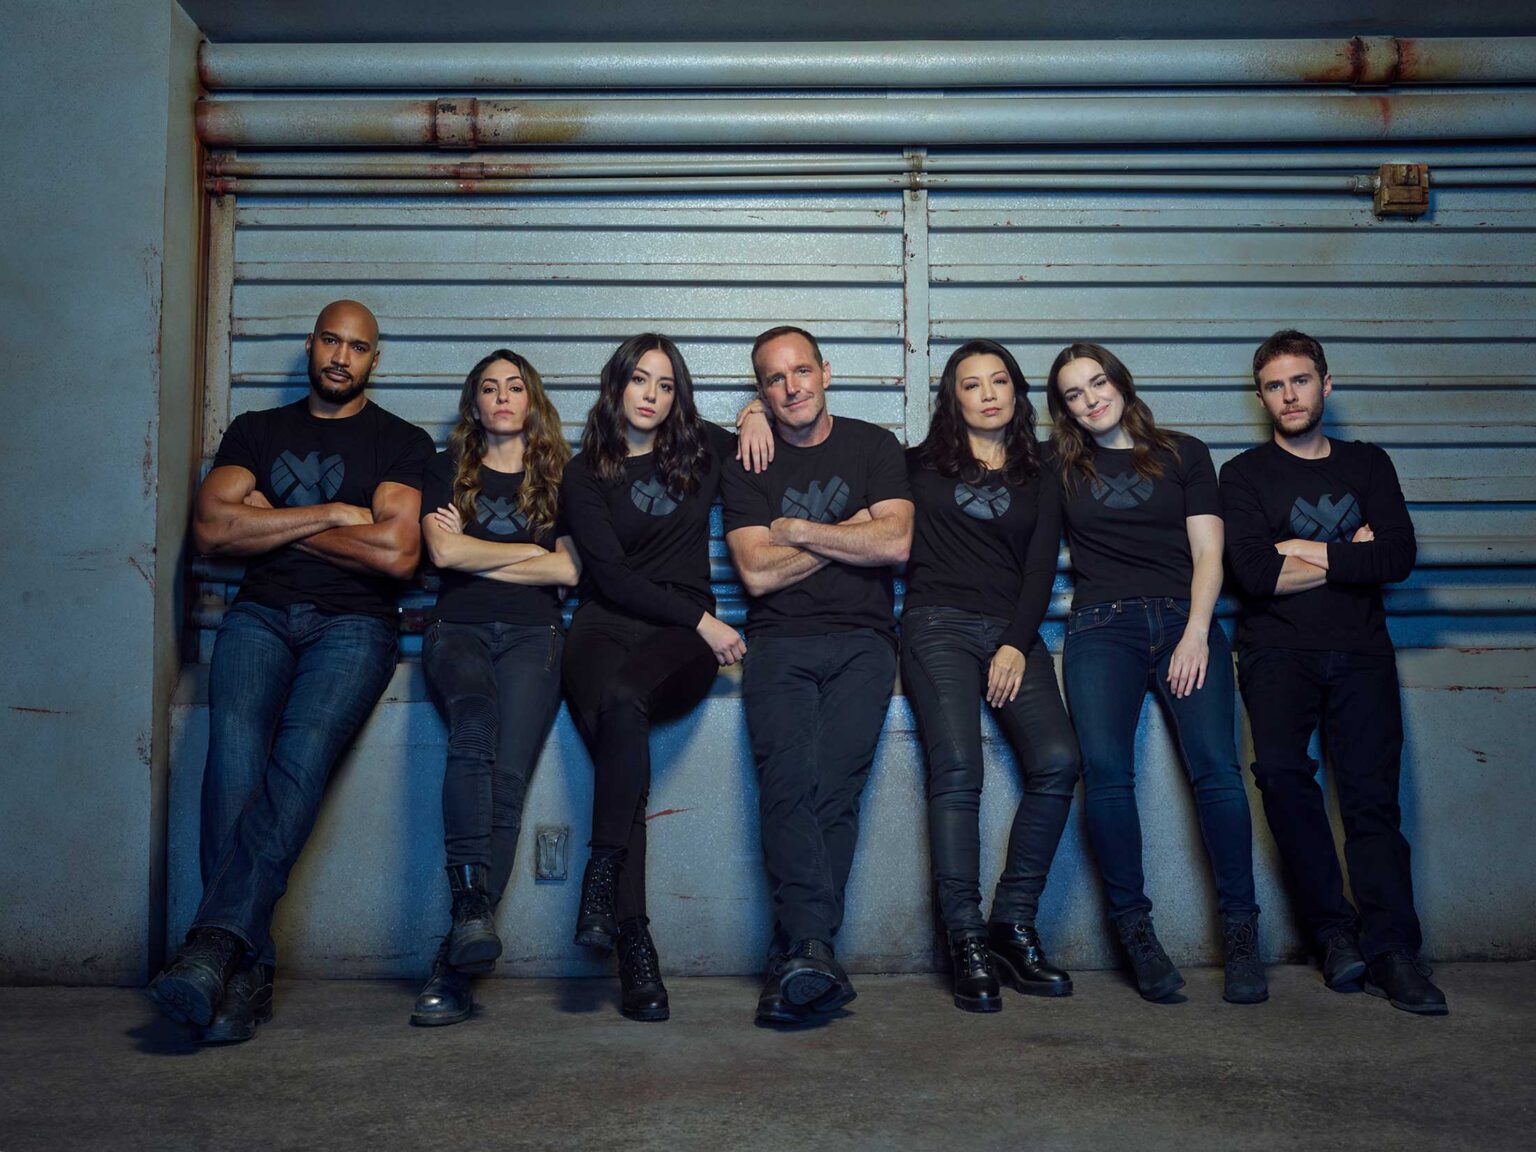 The first two episodes of Marvel’s 'Agents of S.H.I.E.L.D.' season 7 are out. Here’s what we think will happen based on where they’ve been.